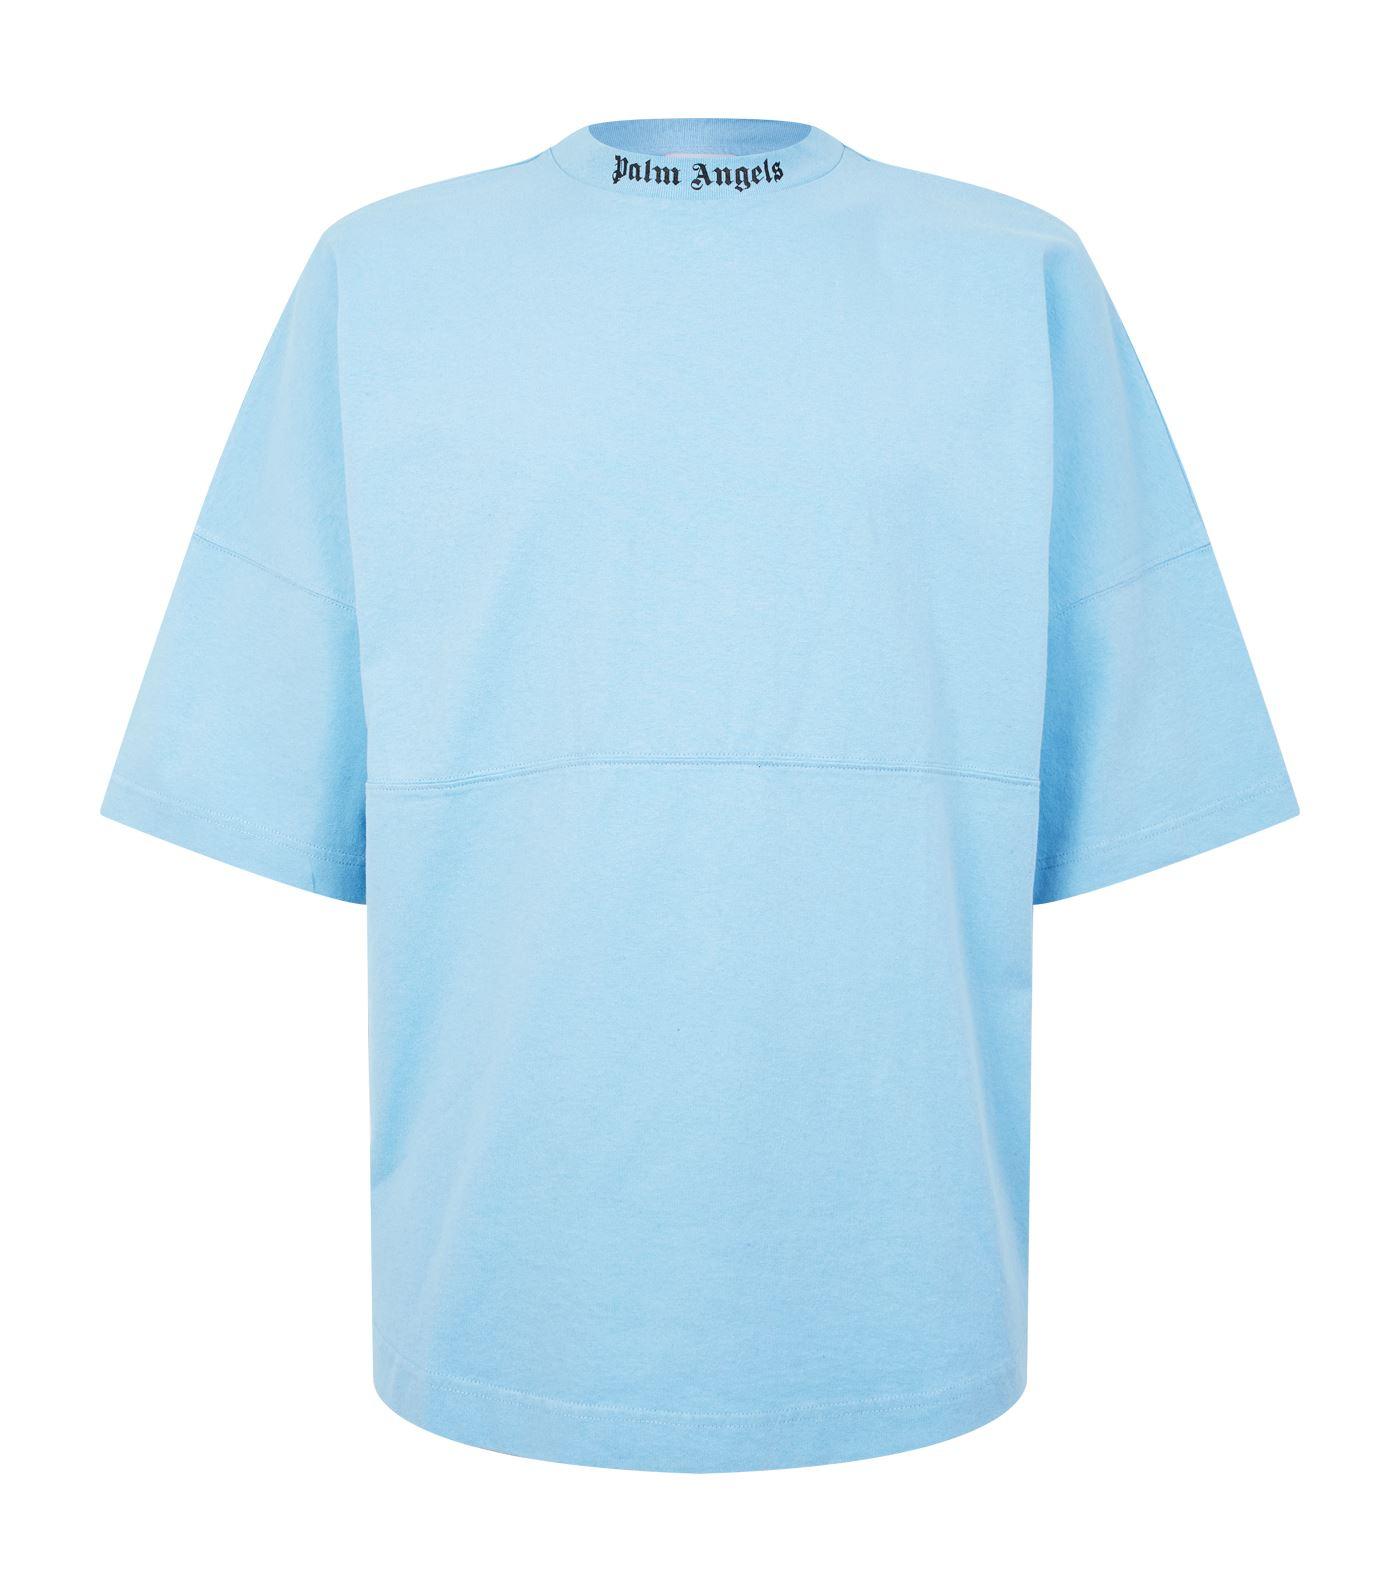 T-shirt Palm Angels Blue size L International in Cotton - 28949709